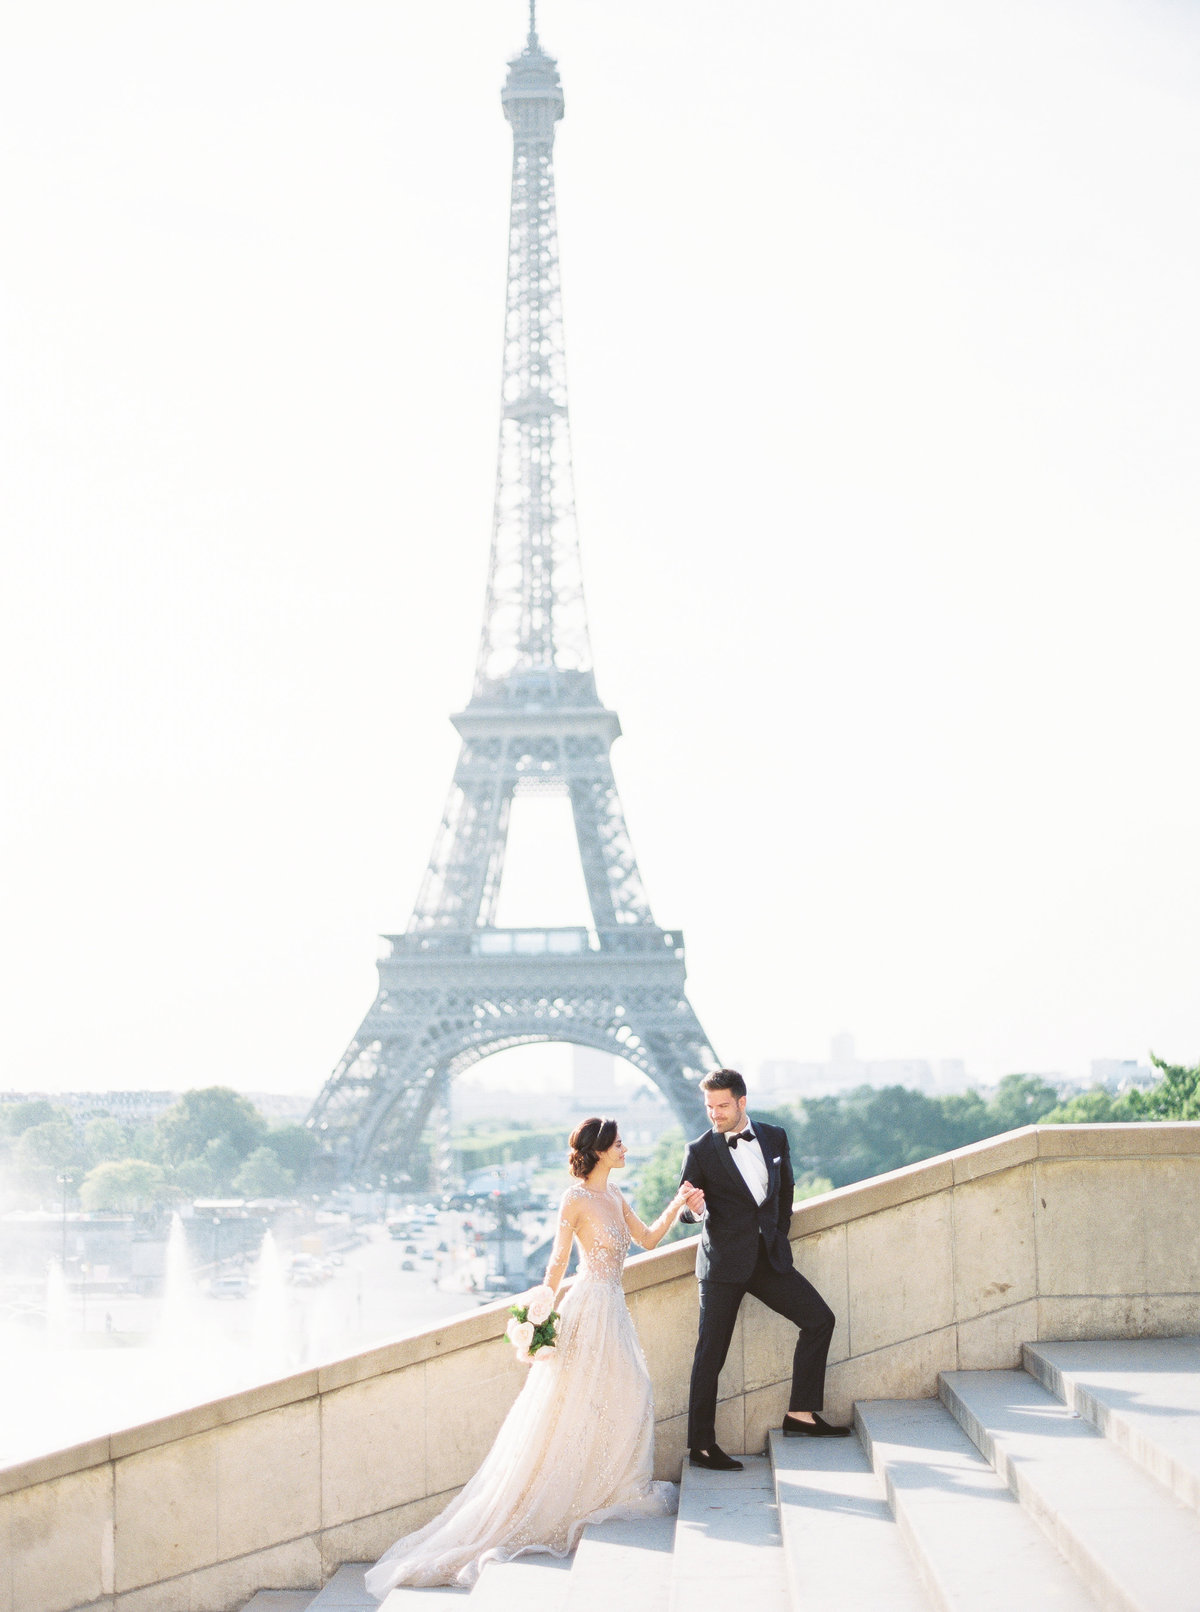 Bride and groom at the Eiffel Tower in Paris, France